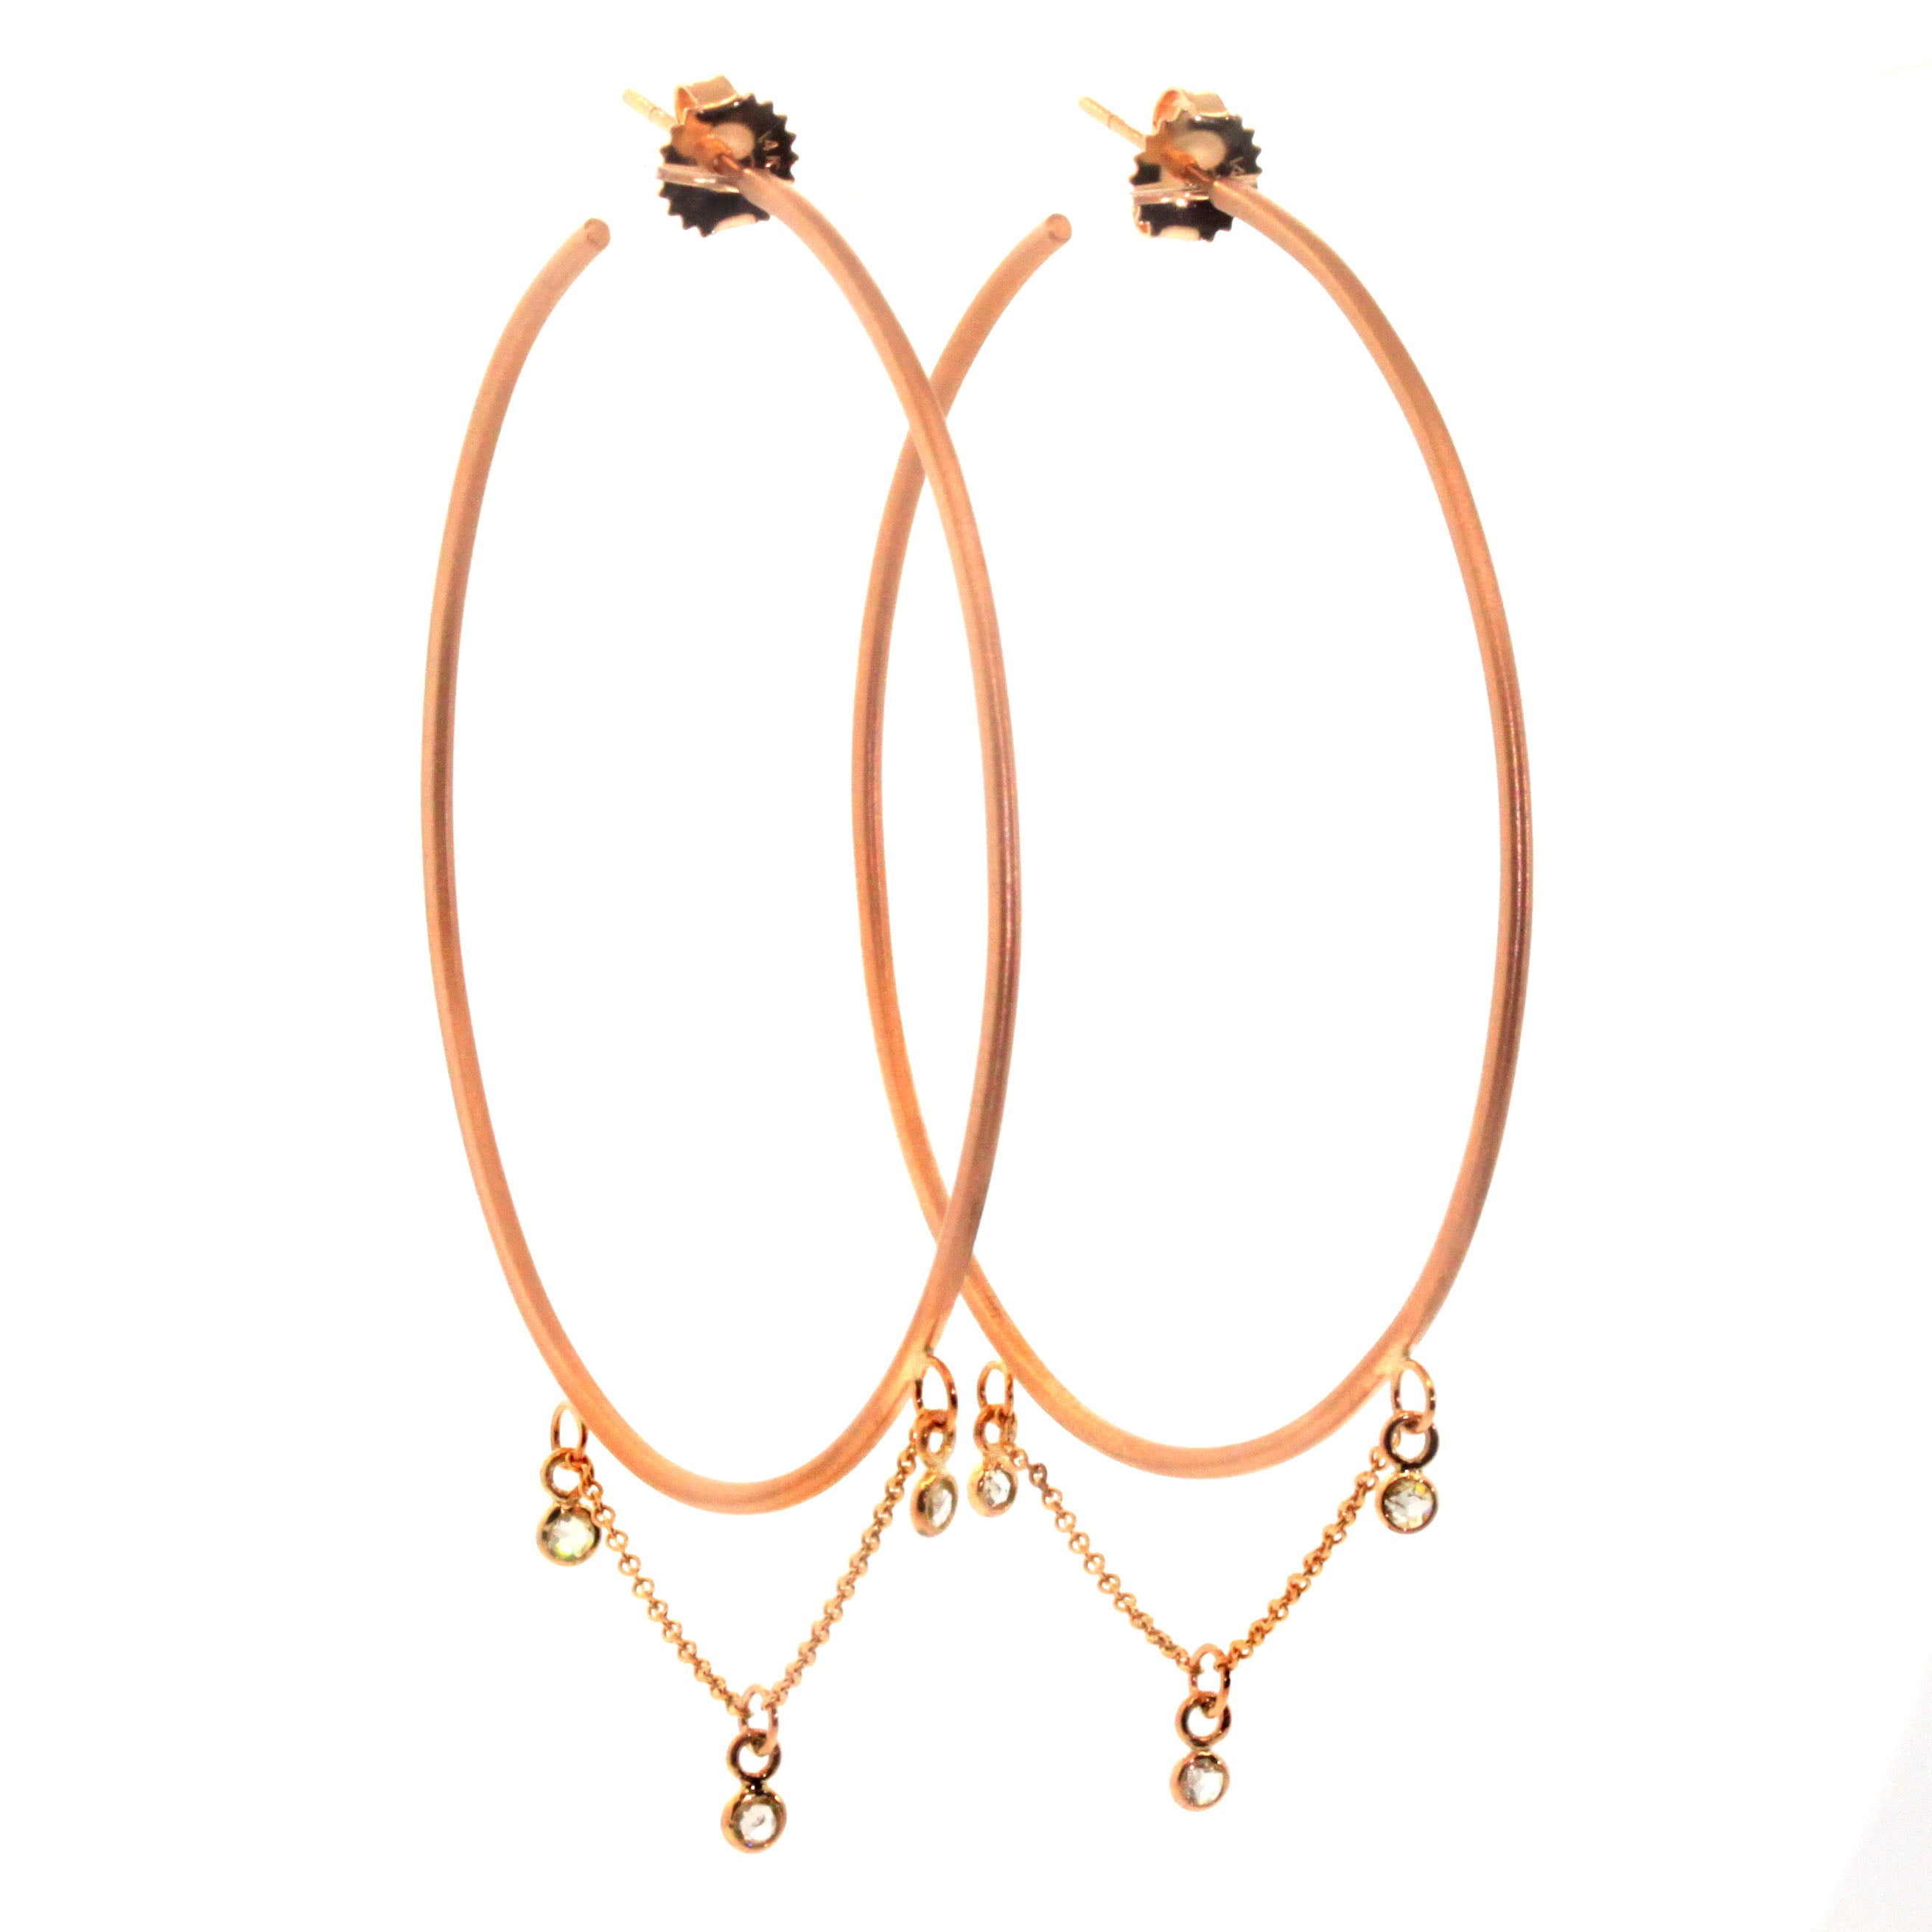 Princess Diamond Hoops handcrafted at Rebecca Lankford Designs in Houston Texas. The feature 3 rose cut diamonds bezel set in rose gold and dangling from a chain soldered to thin, large rose gold hoops.